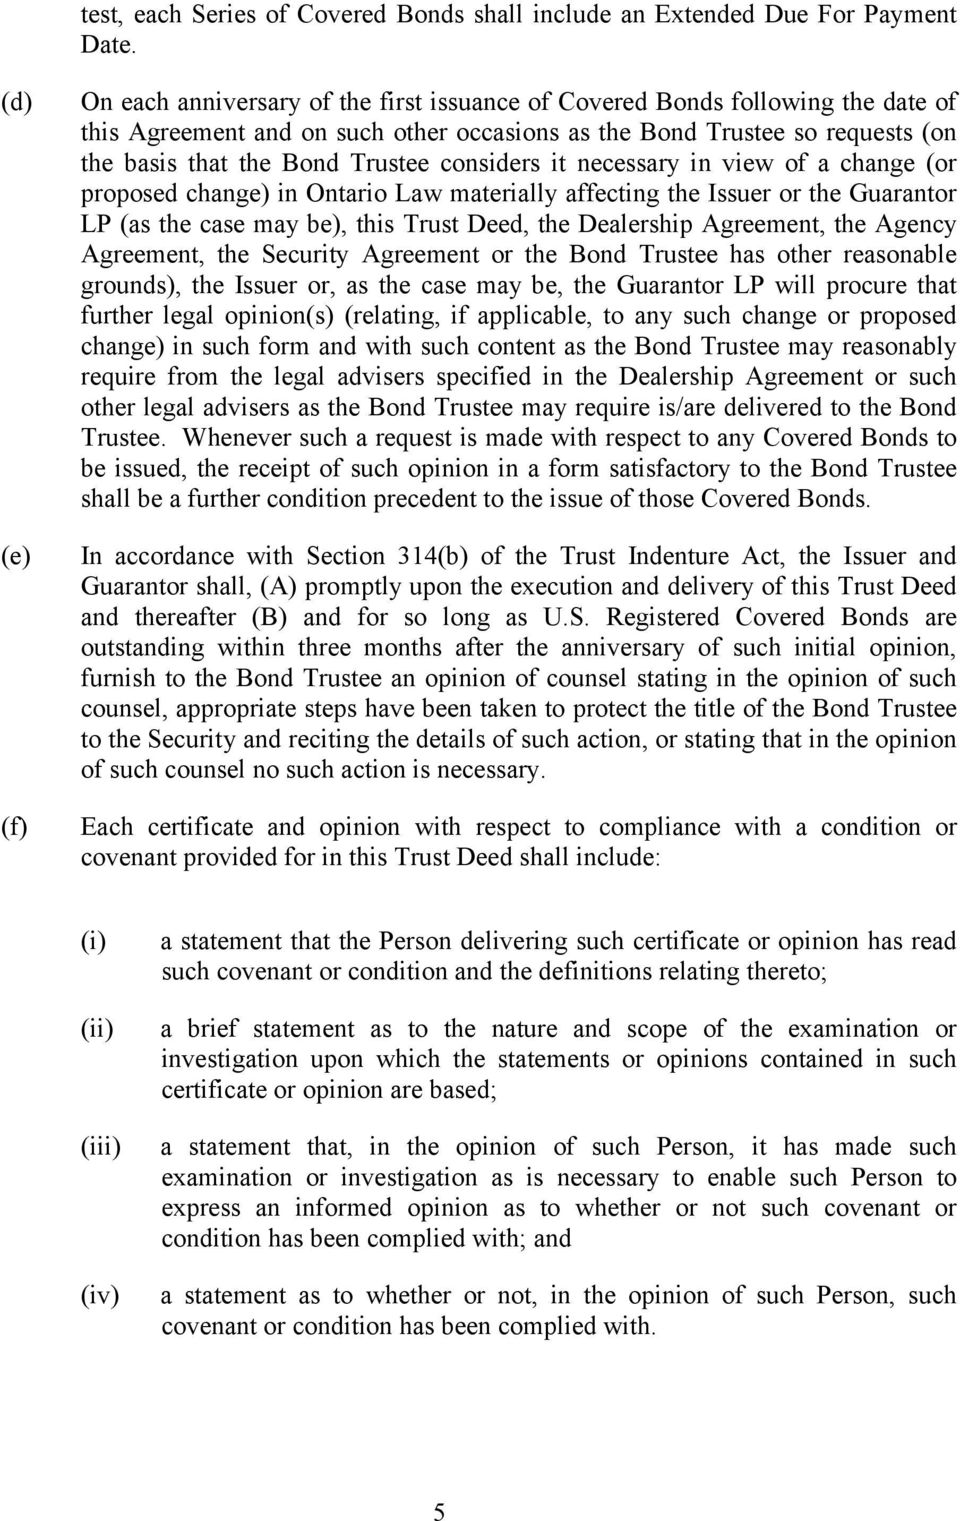 Trustee considers it necessary in view of a change (or proposed change) in Ontario Law materially affecting the Issuer or the Guarantor LP (as the case may be), this Trust Deed, the Dealership